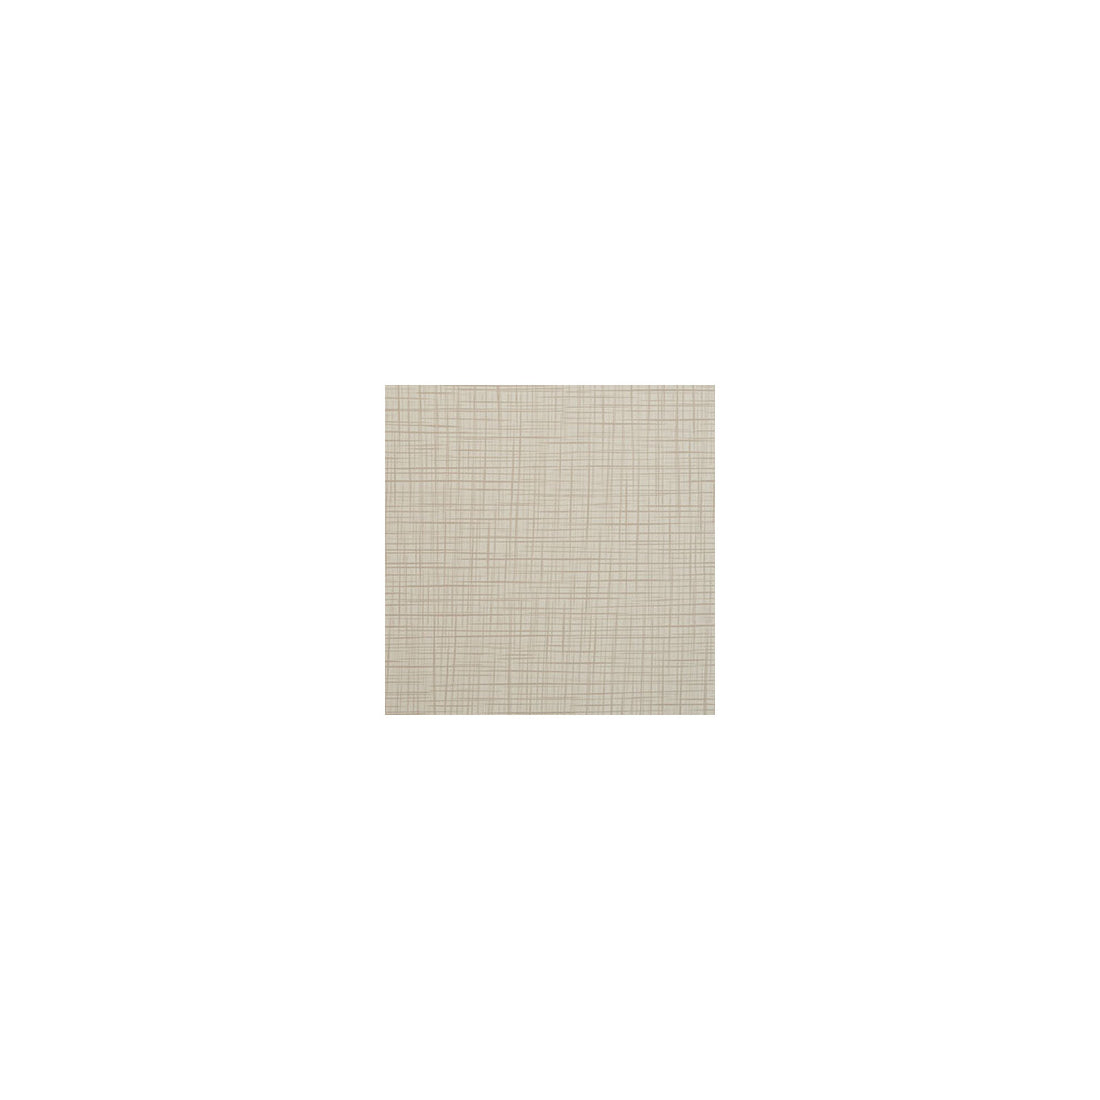 Chord fabric in oat color - pattern CHORD.166.0 - by Kravet Contract in the Sta-Kleen collection